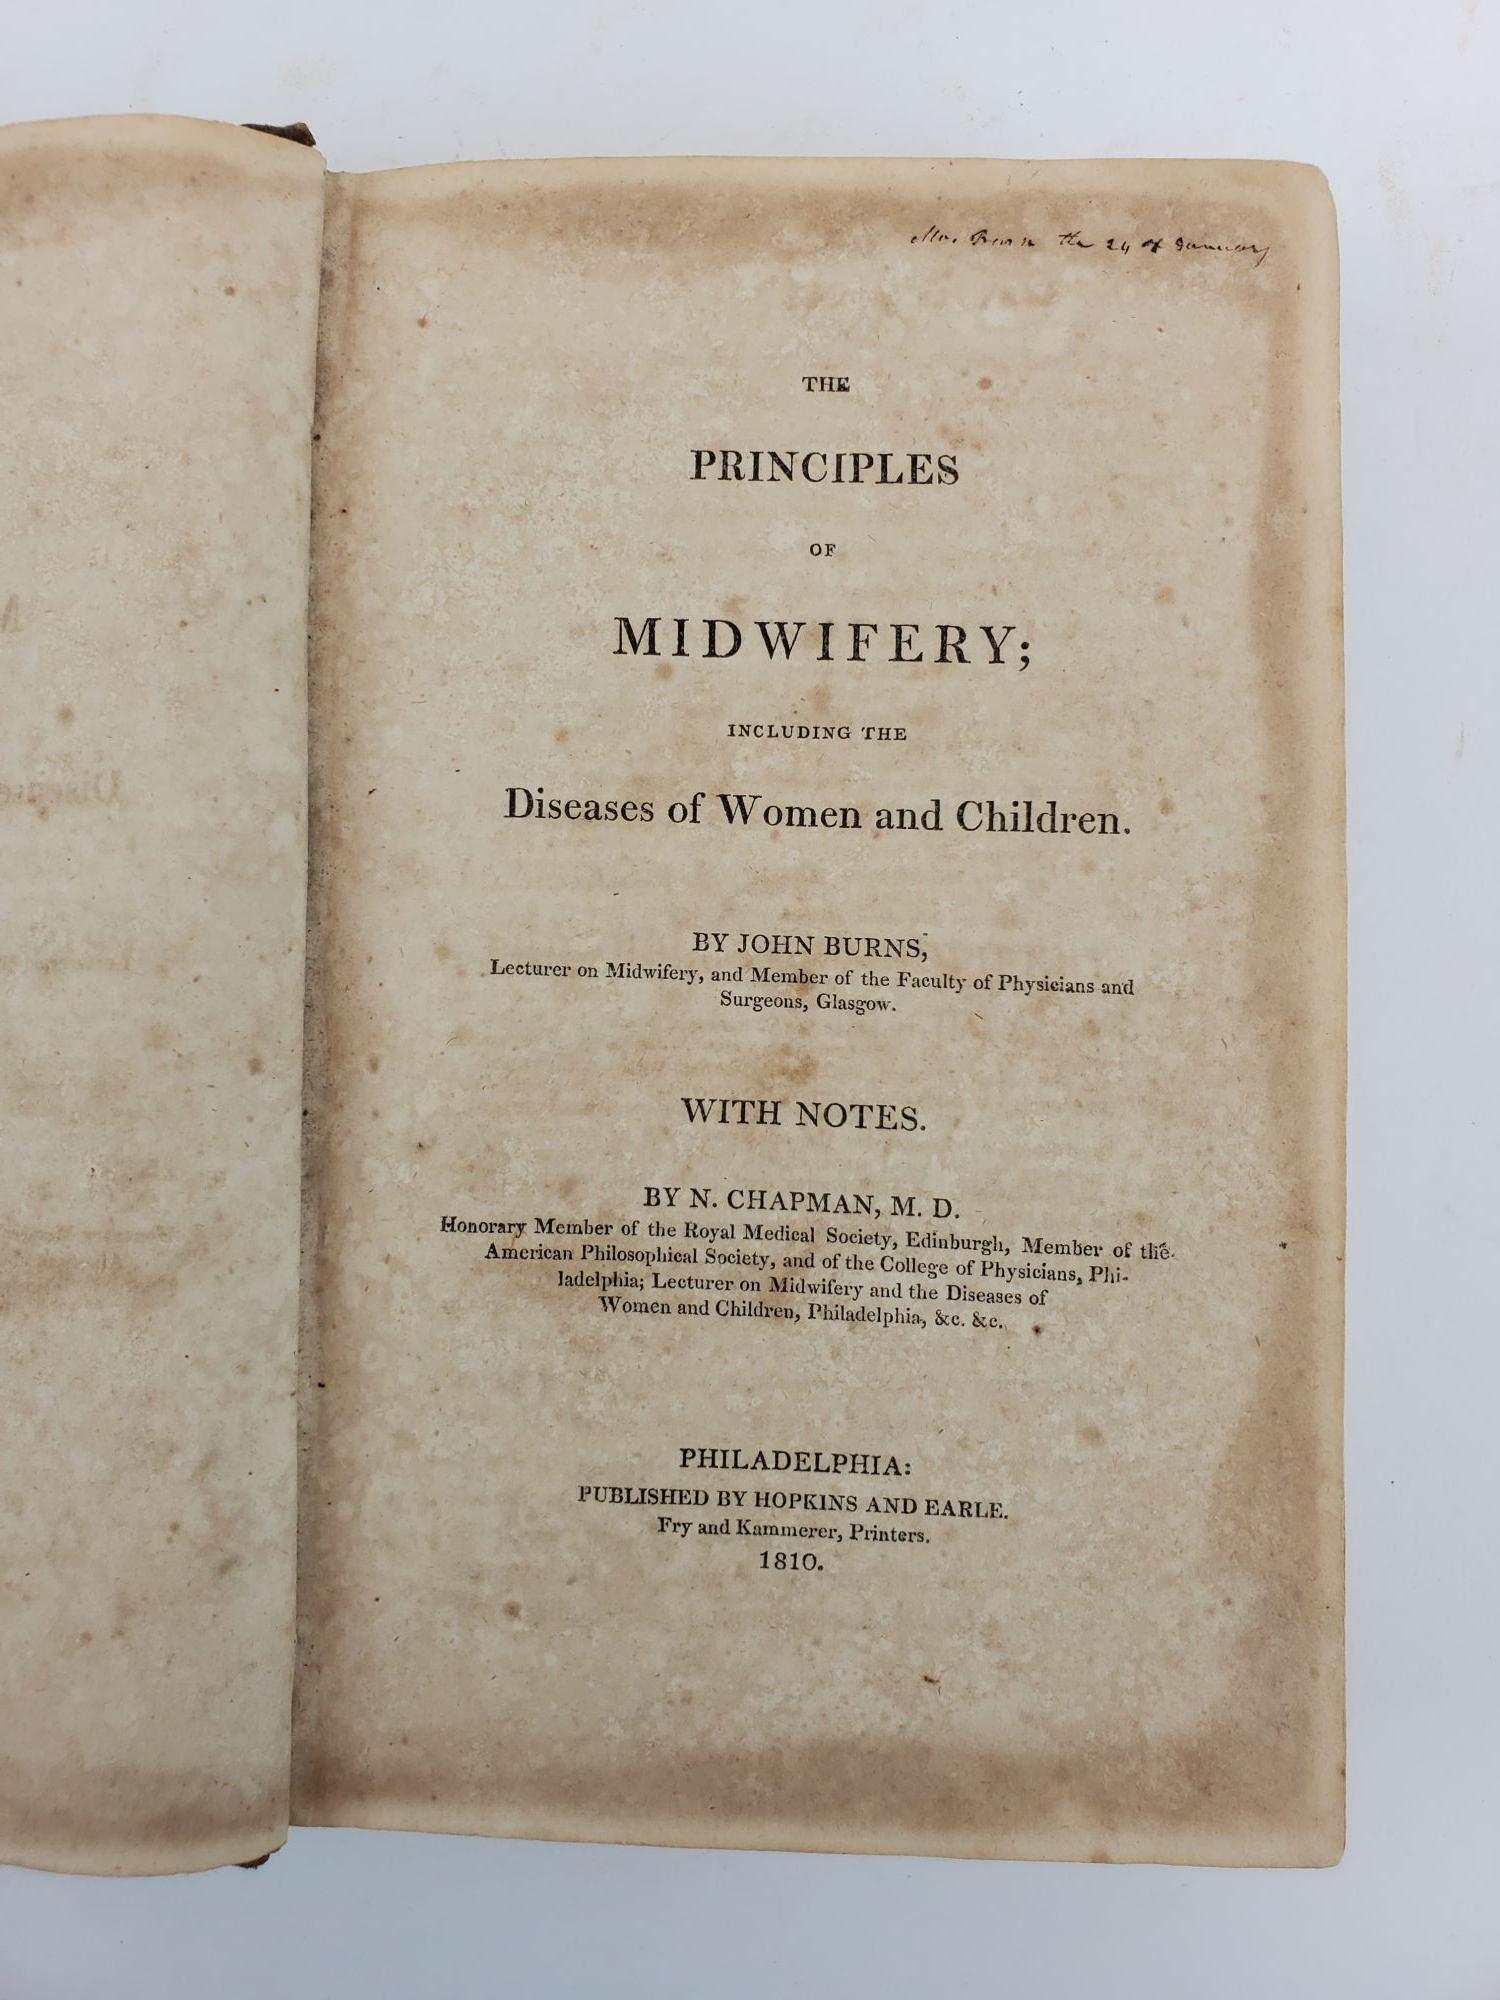 Product Image for THE PRINCIPLES OF MIDWIFERY; INCLUDING THE DISEASES OF WOMEN AND CHILDREN